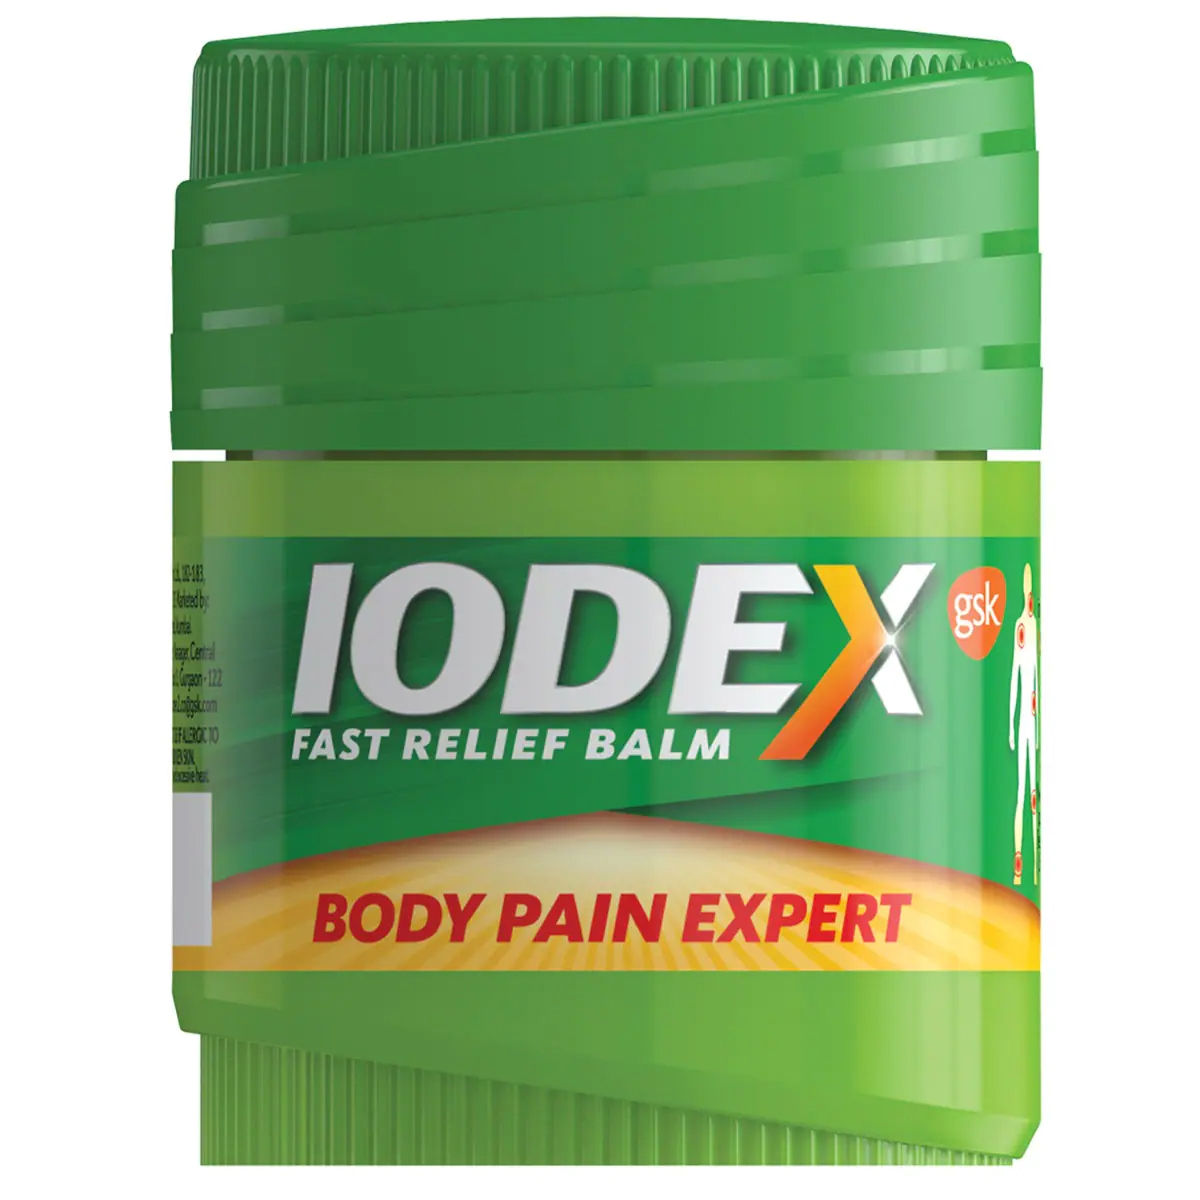 Iodex Fast Relief Balm, 8 gm, Pack of 1 